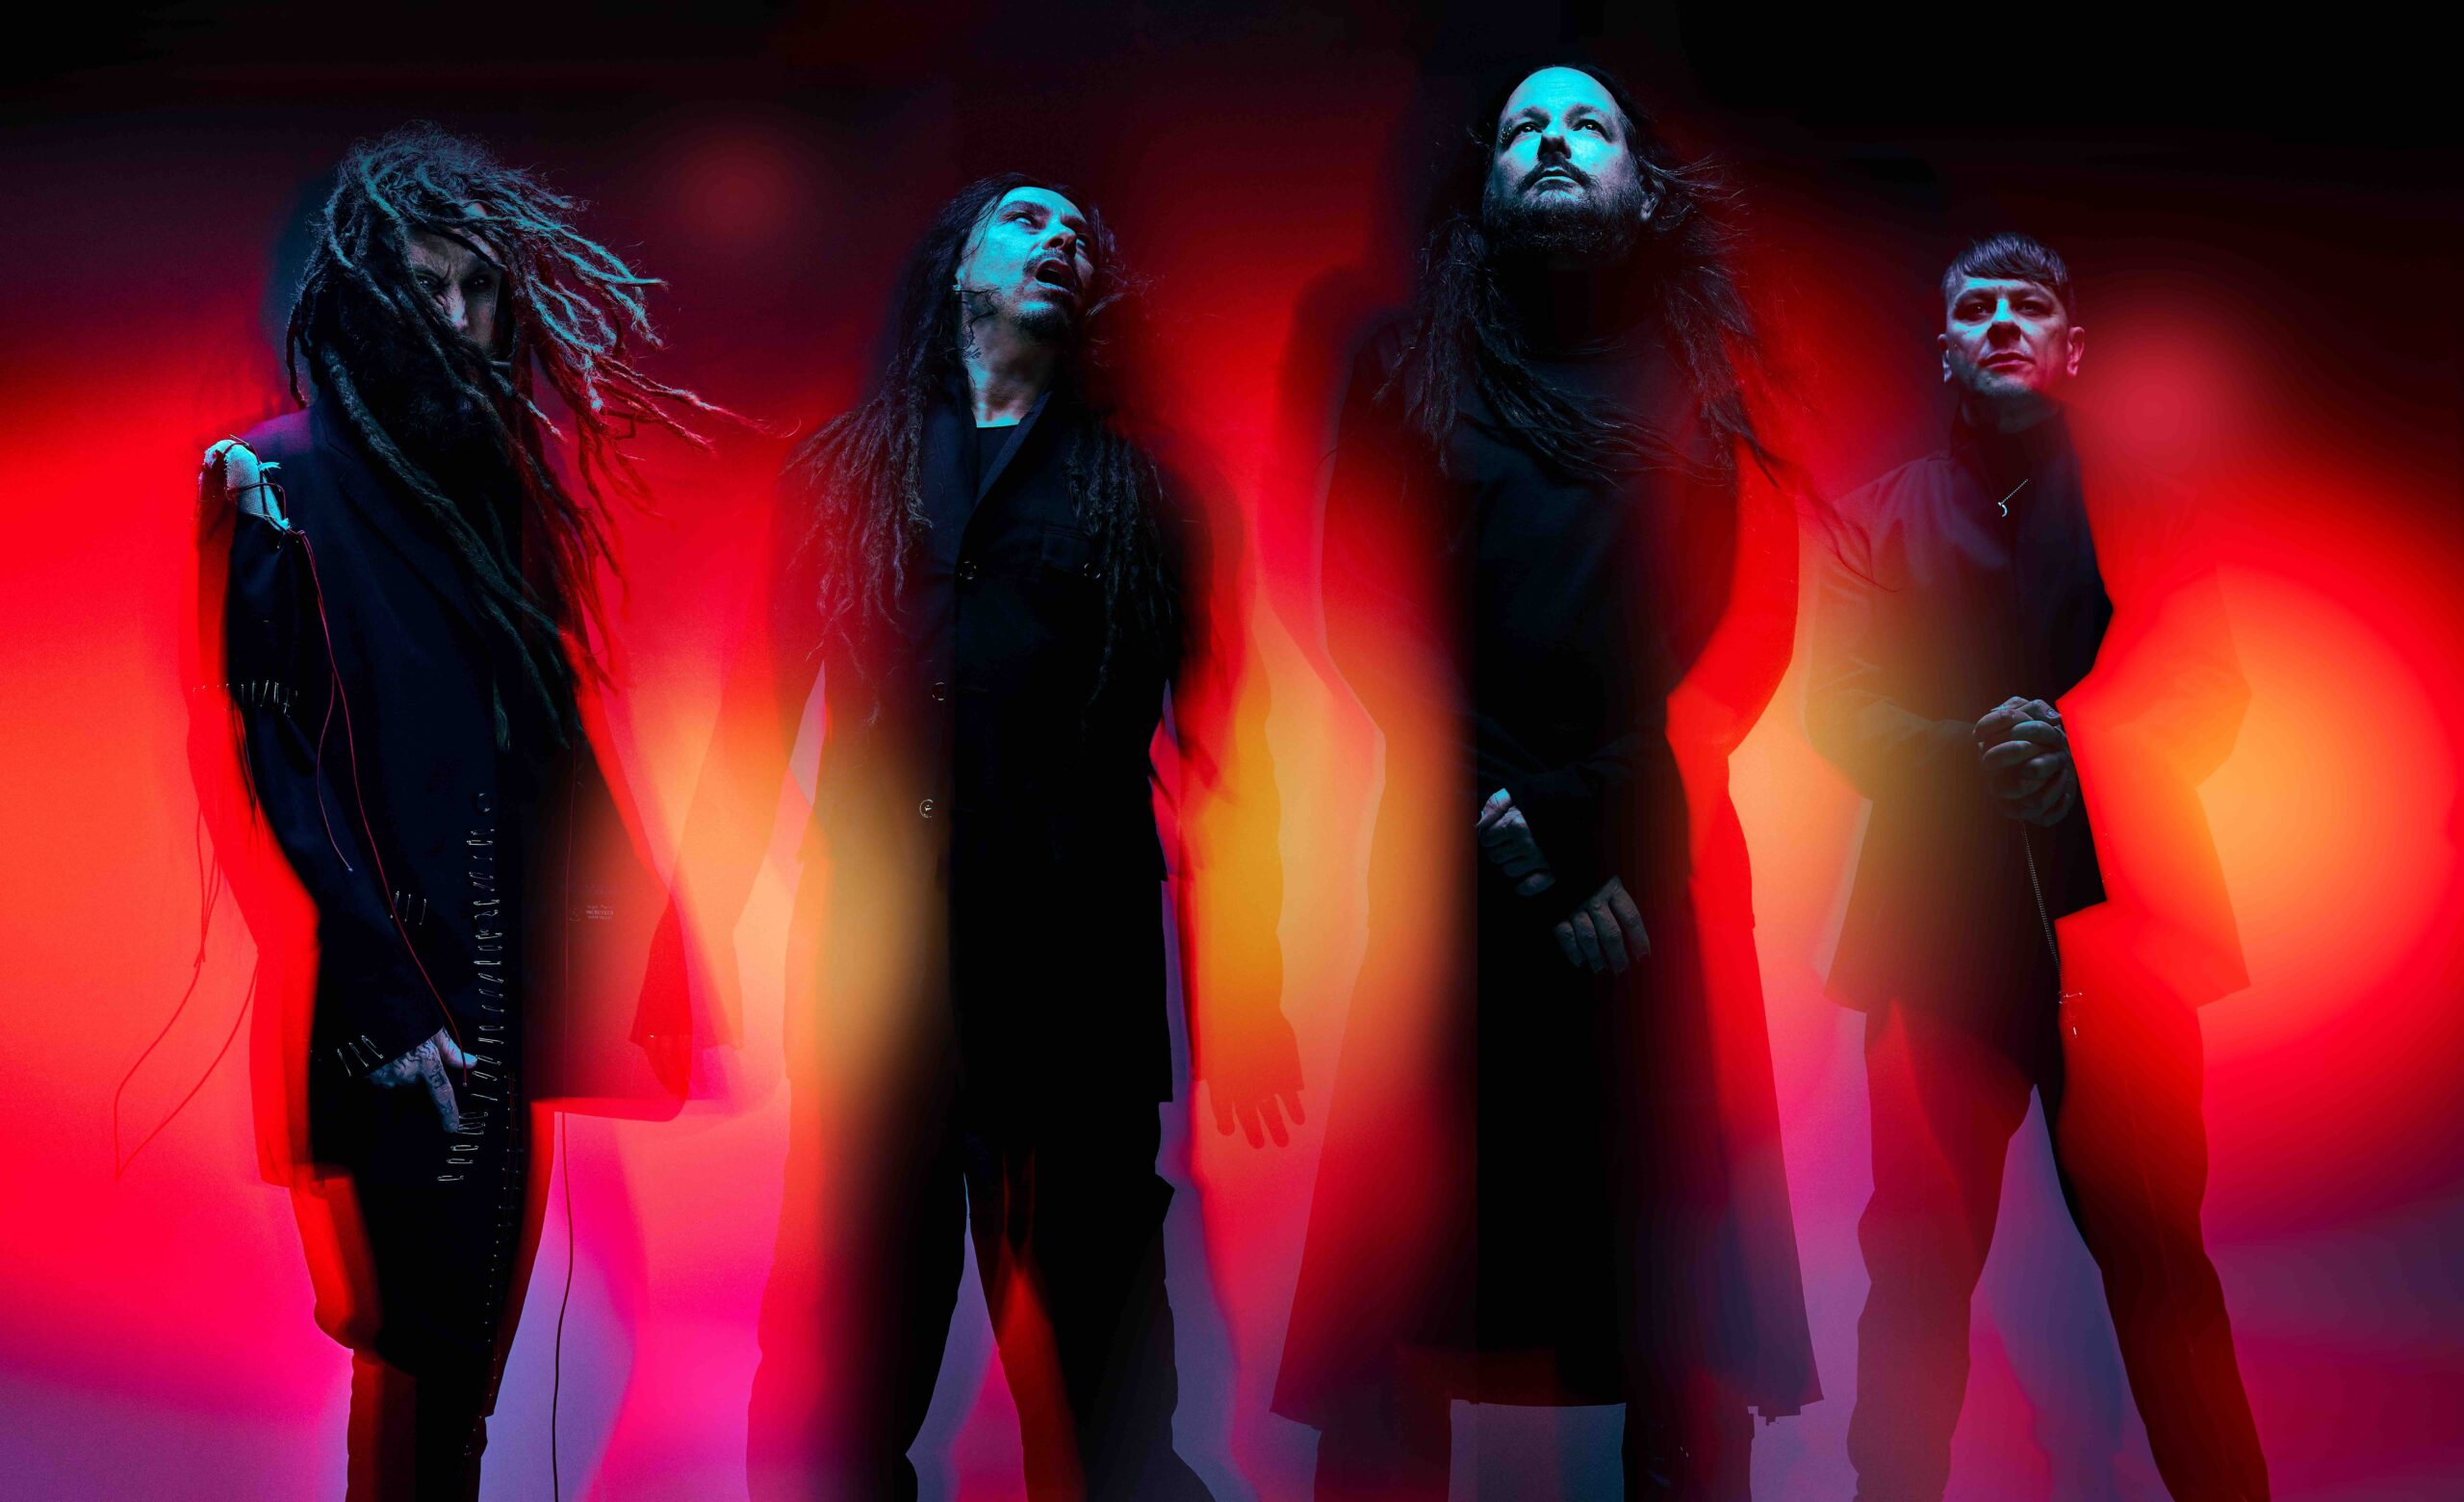 KORN SHARES NEW SONG ‘FORGOTTEN’ FROM ‘REQUIEM’ DUE FEBRUARY 4